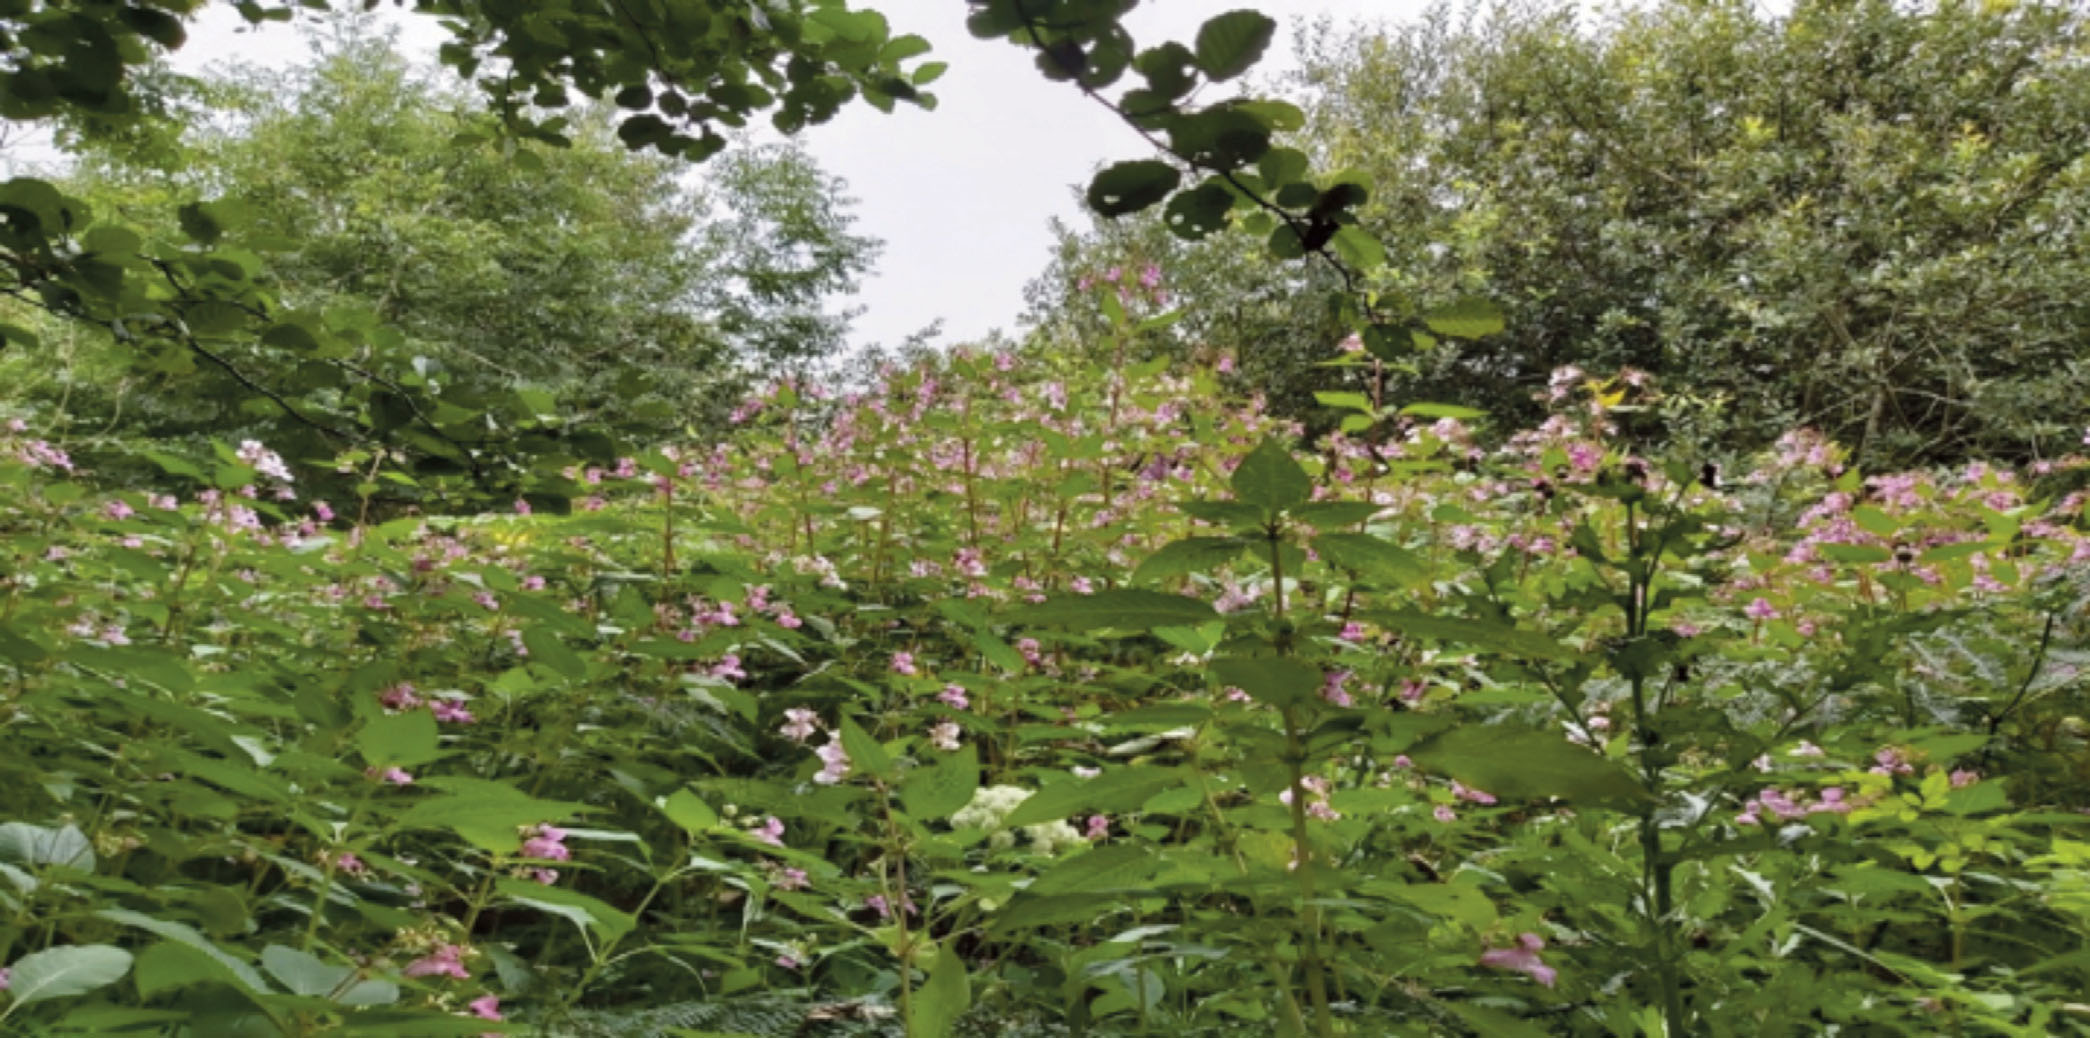 Area of a woodland being completely overtaken by Himalaya balsam plants with pink flowers on very tall plants